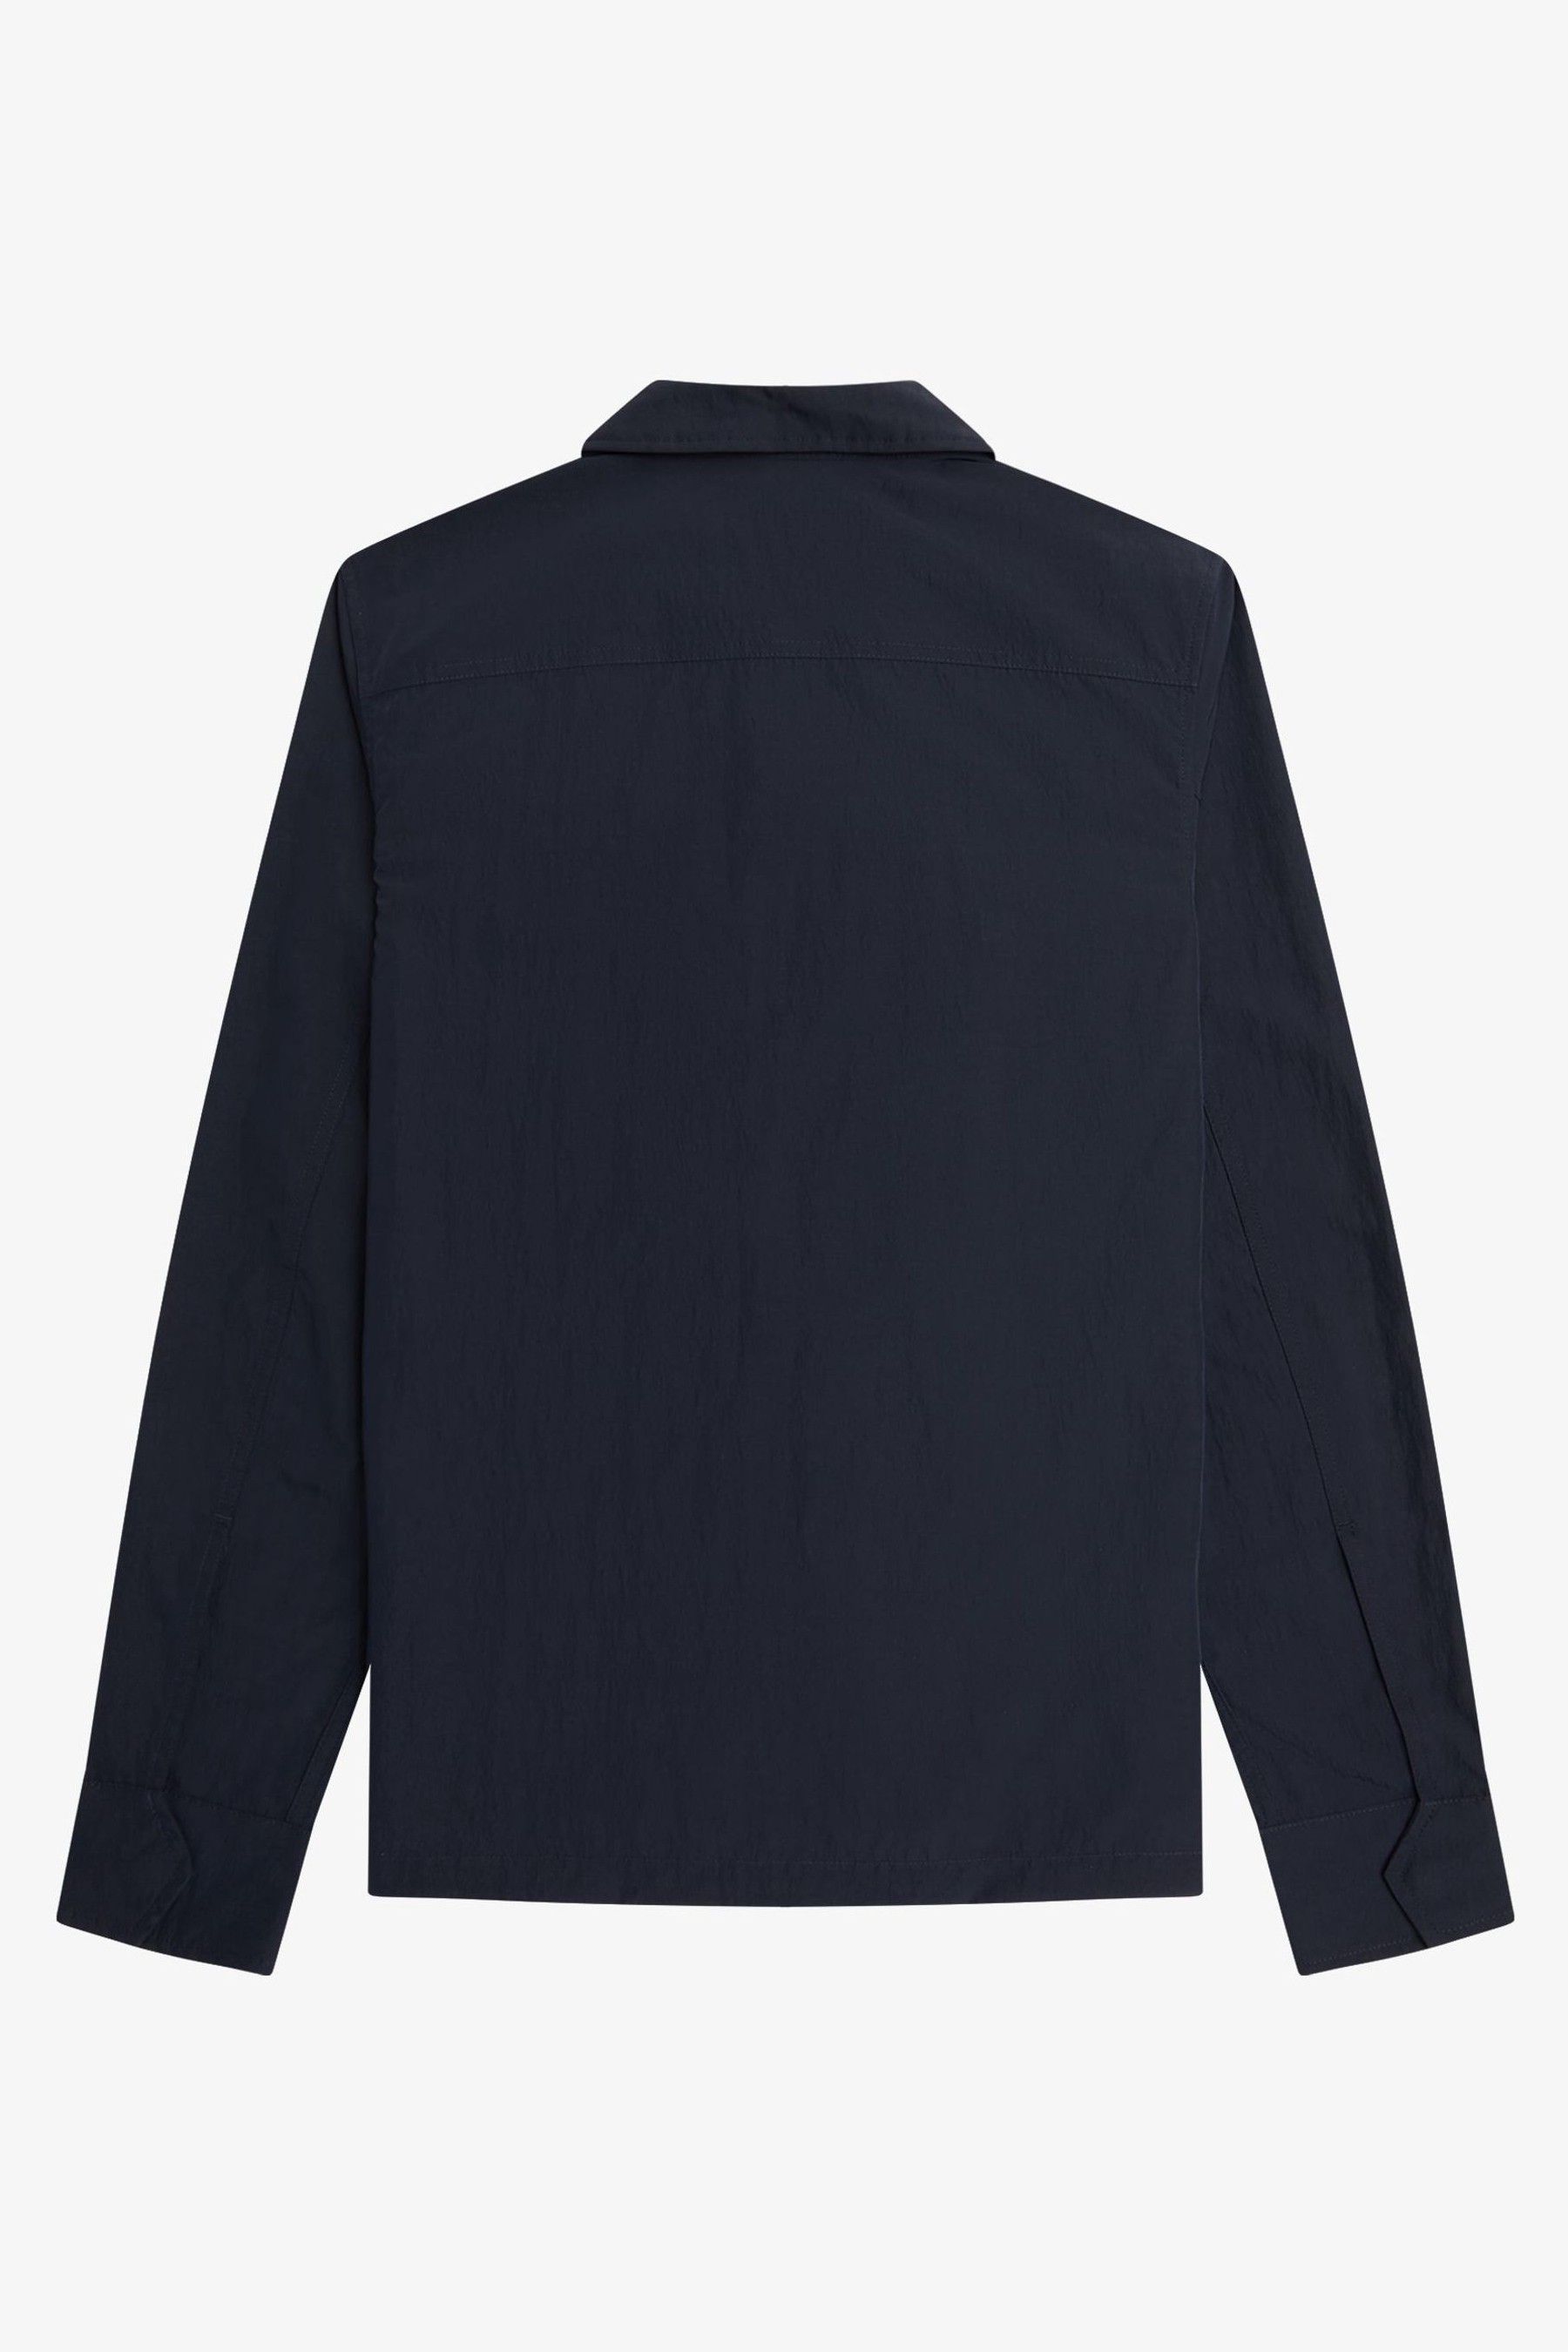 Buy Fred Perry Zip Through Lightweight Jacket from the Next UK online shop